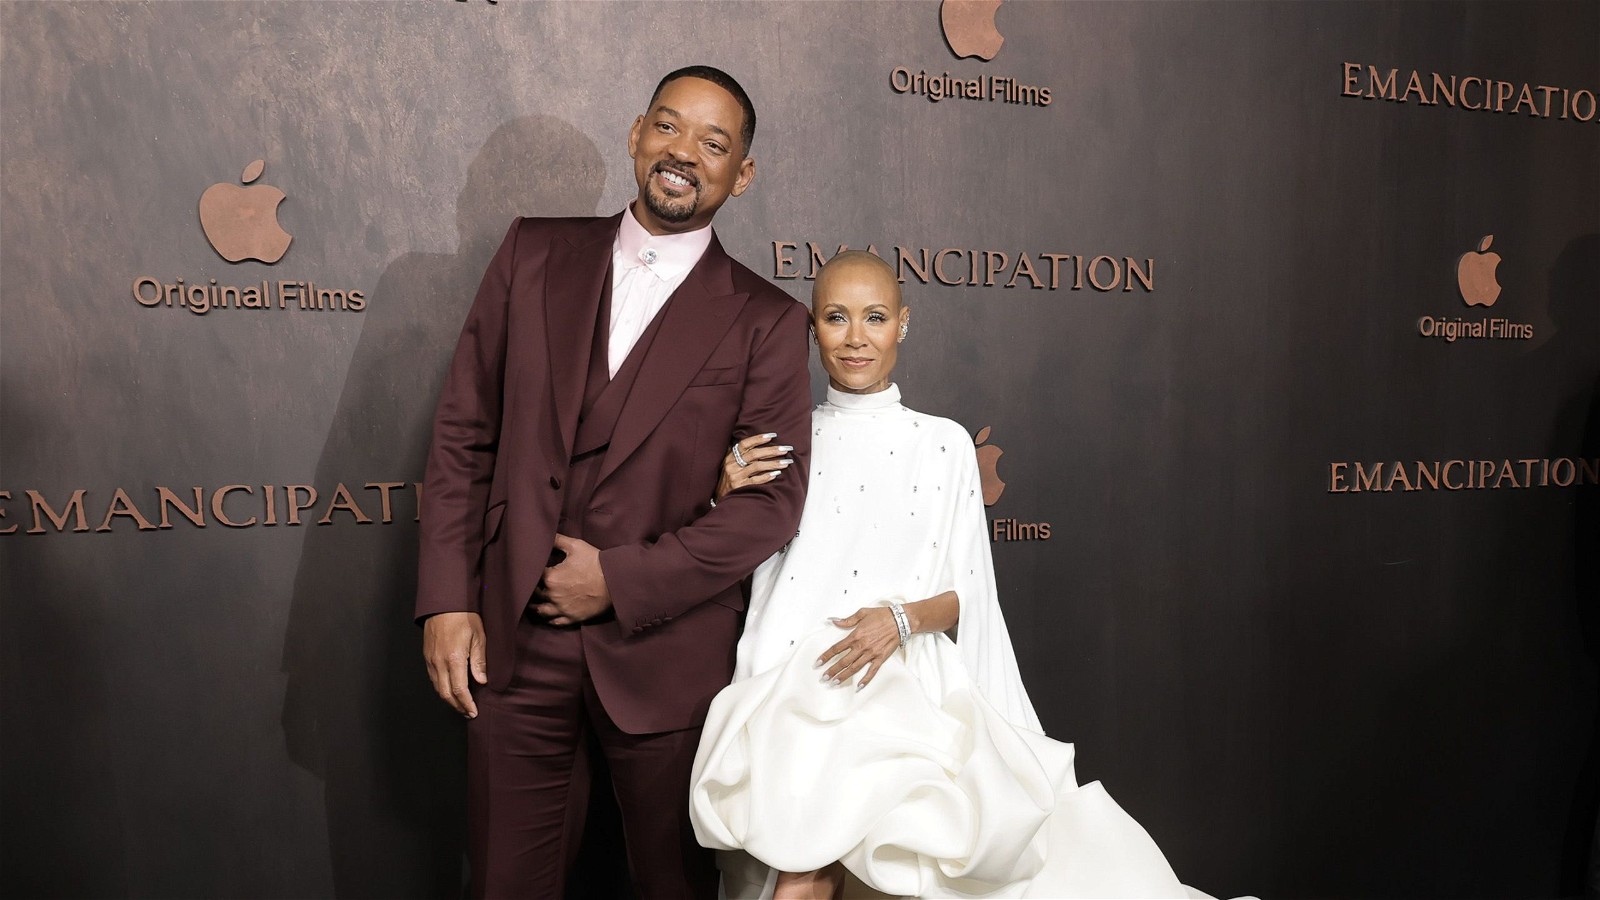 Will Smith and Jada Pinkett Smith at the premiere of Emancipation